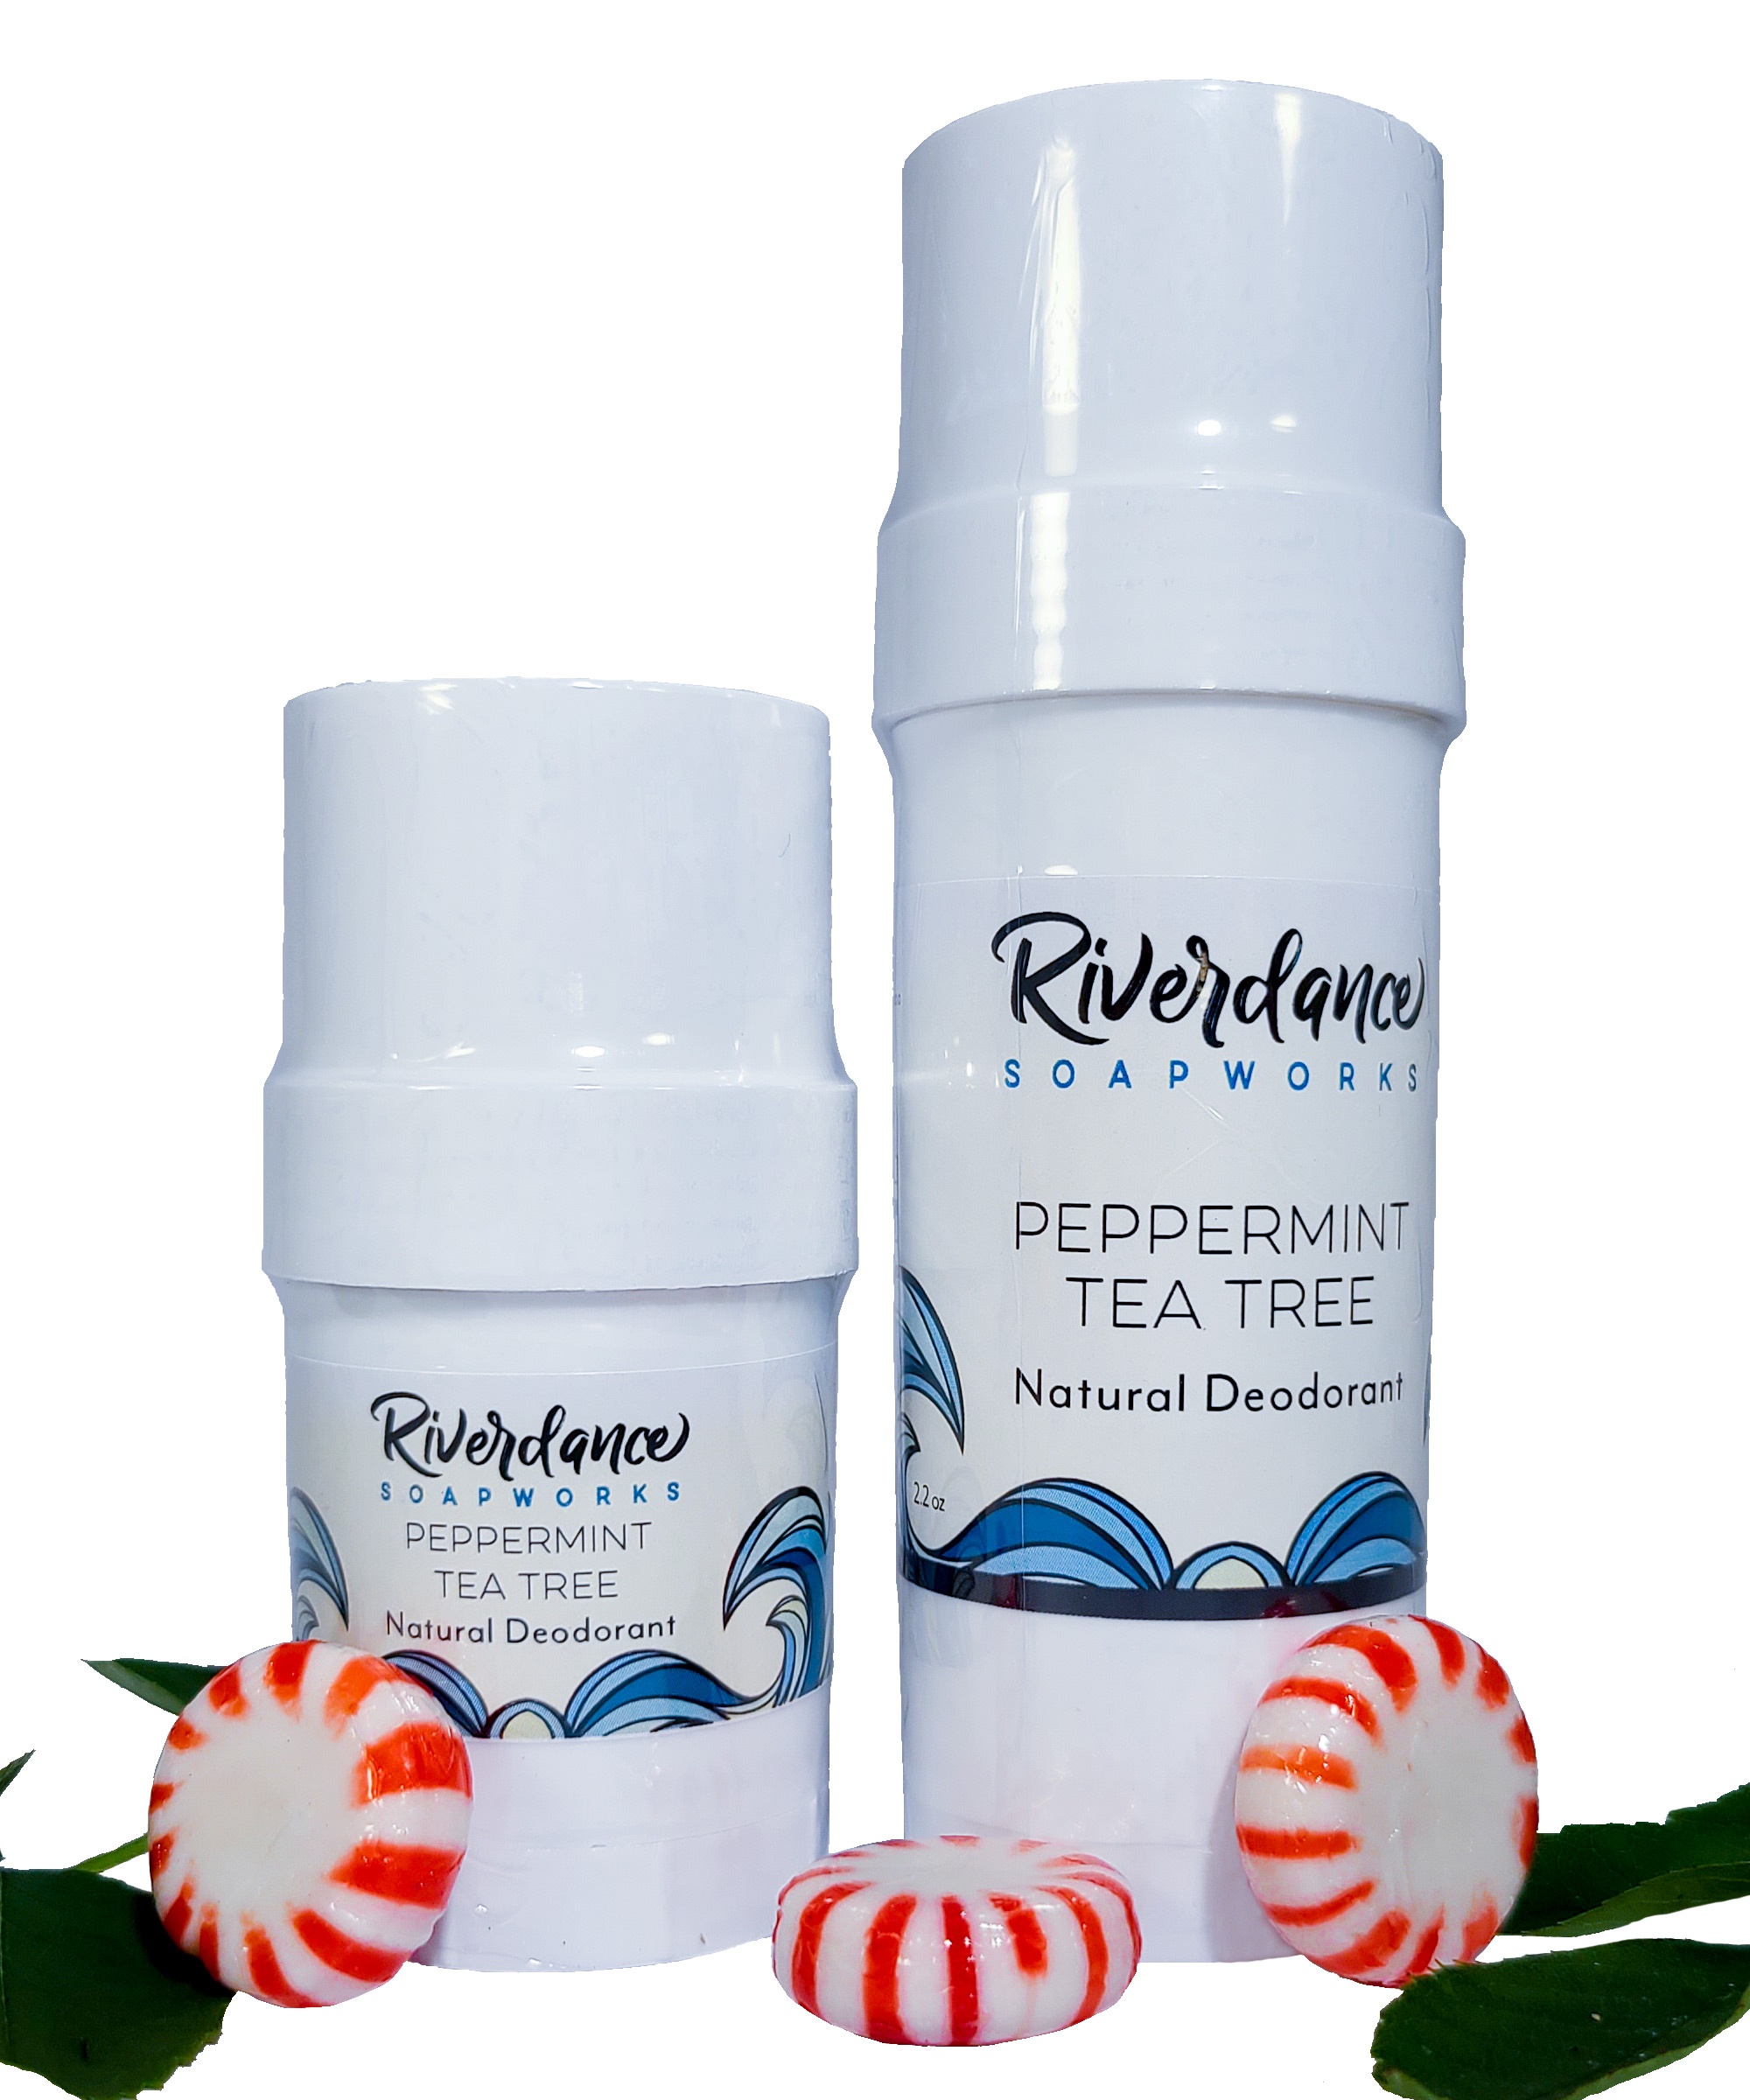 Product image for Peppermint and Tea Tree Natural Deodorant breathe cylinder shaped bath bomb